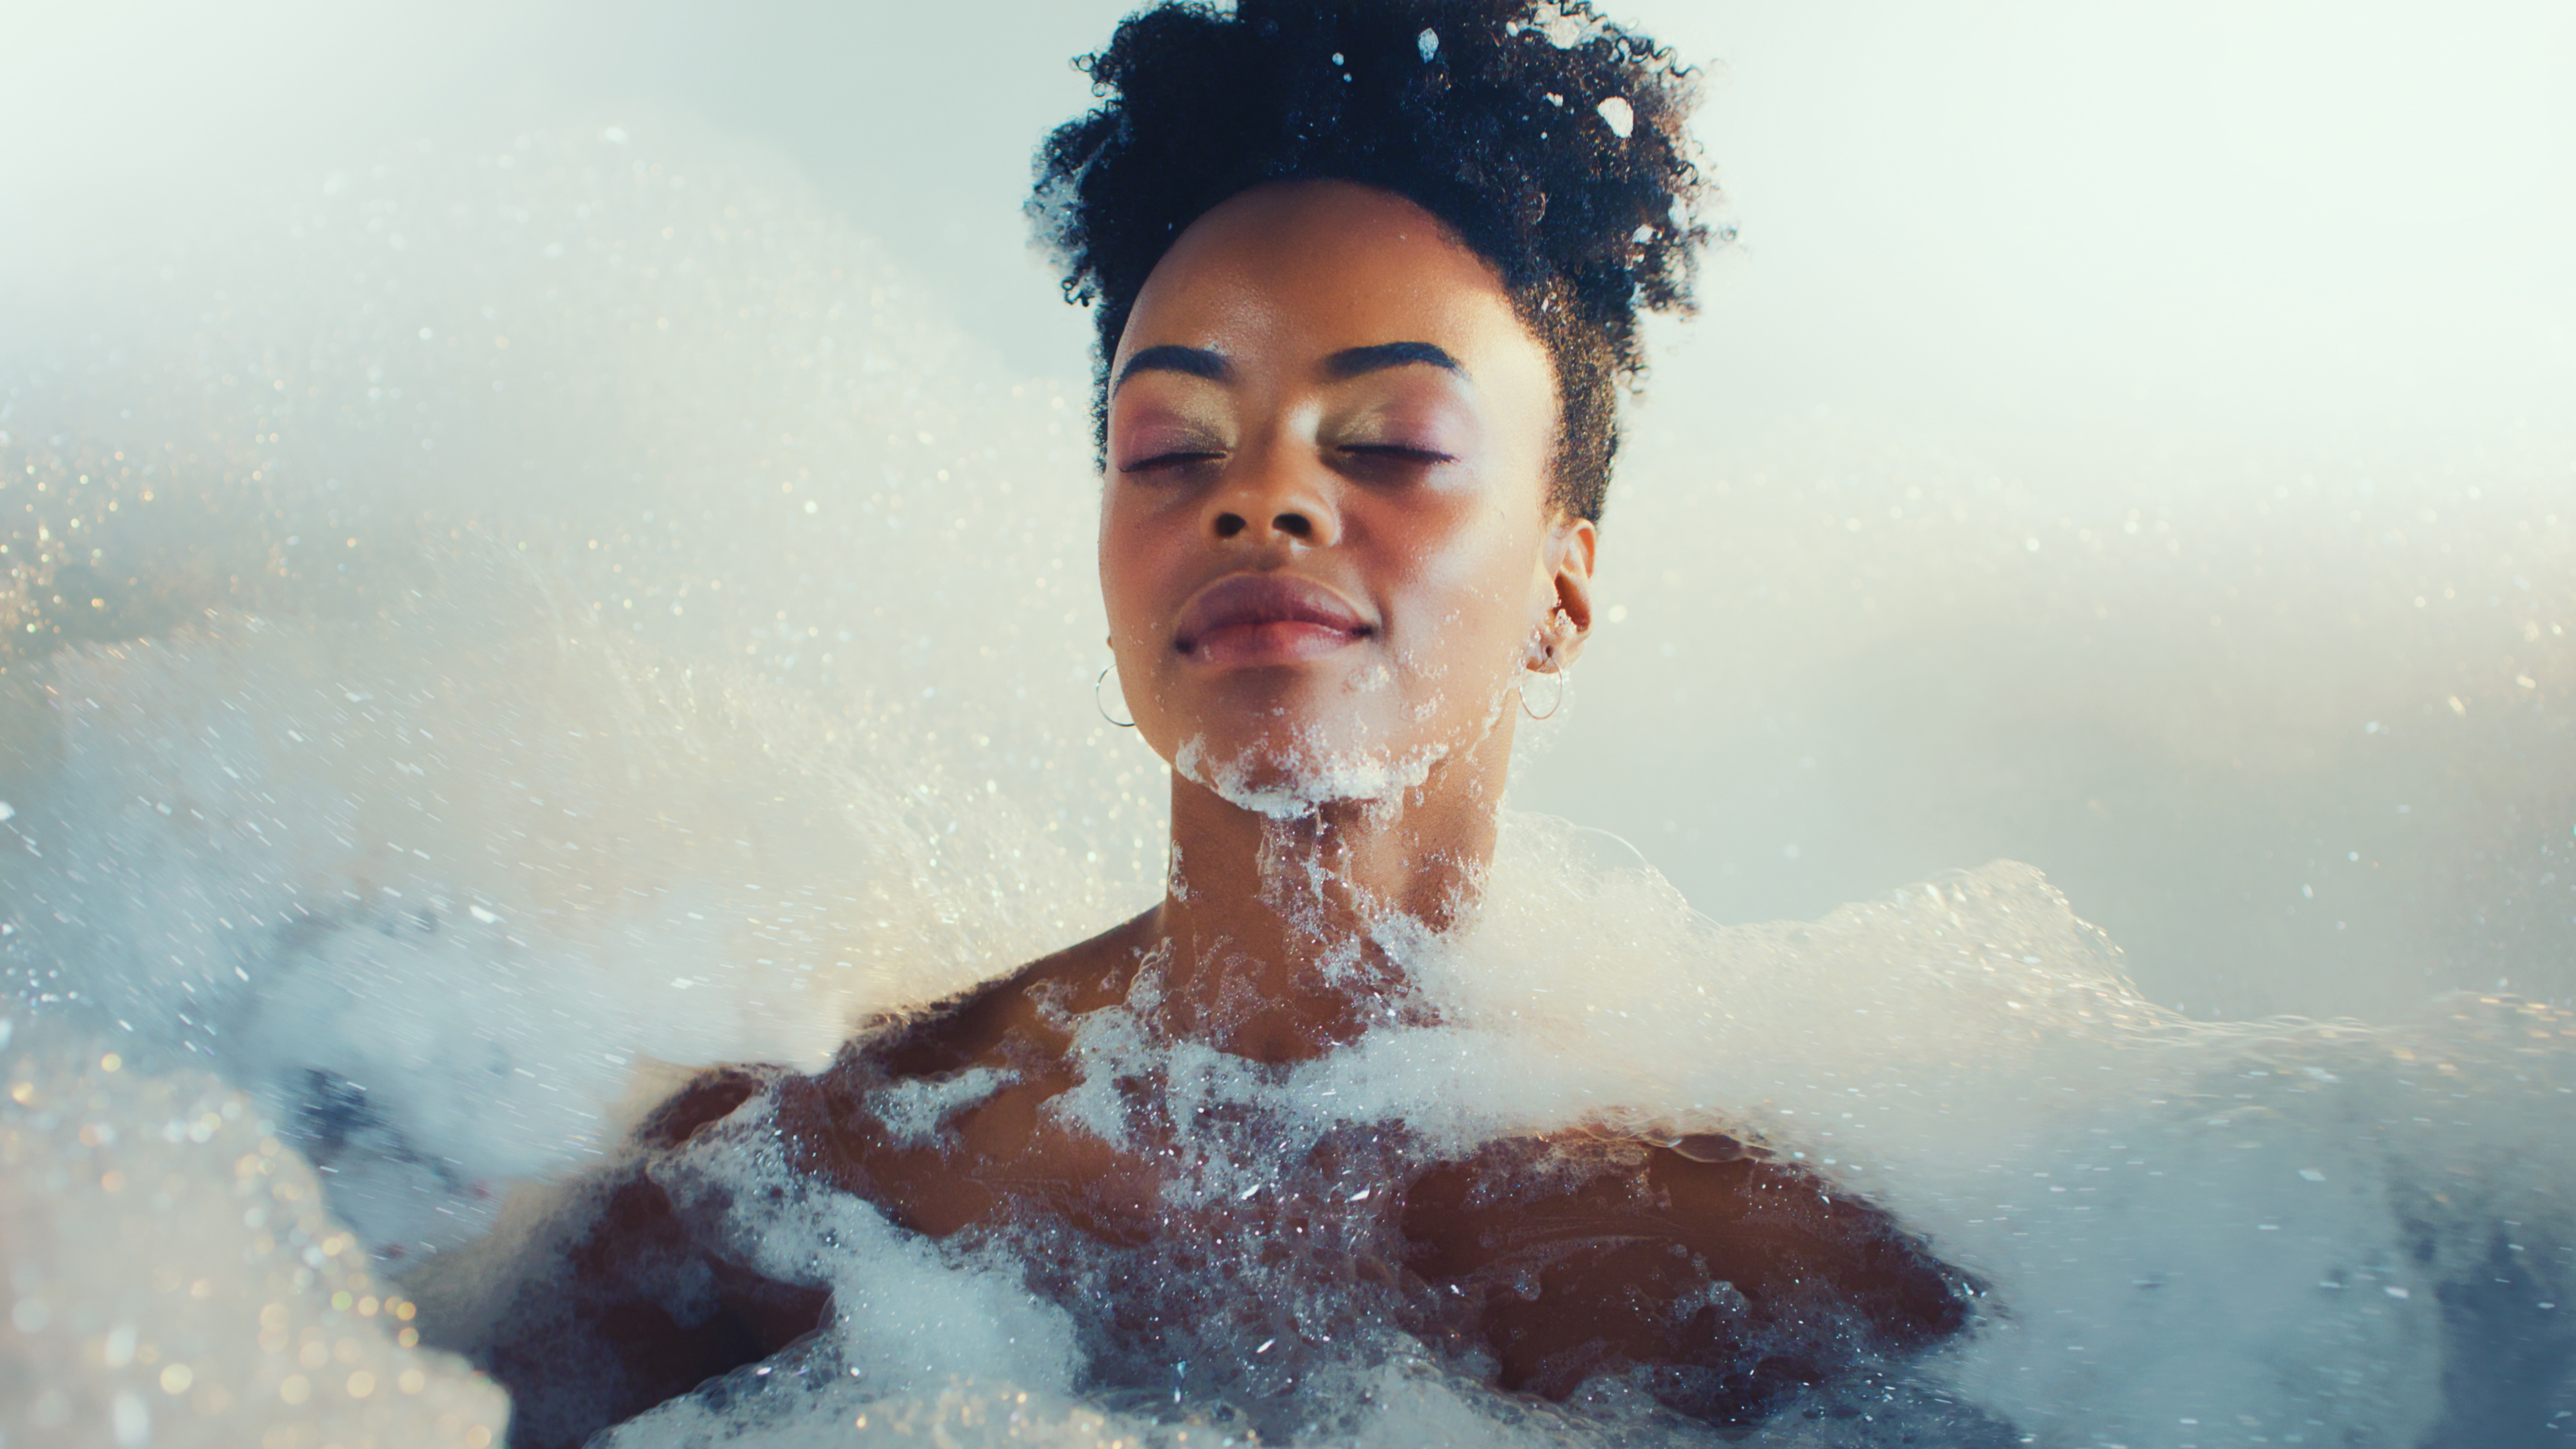 the importance of nurturing oneself through self-care activities like a bubble bath